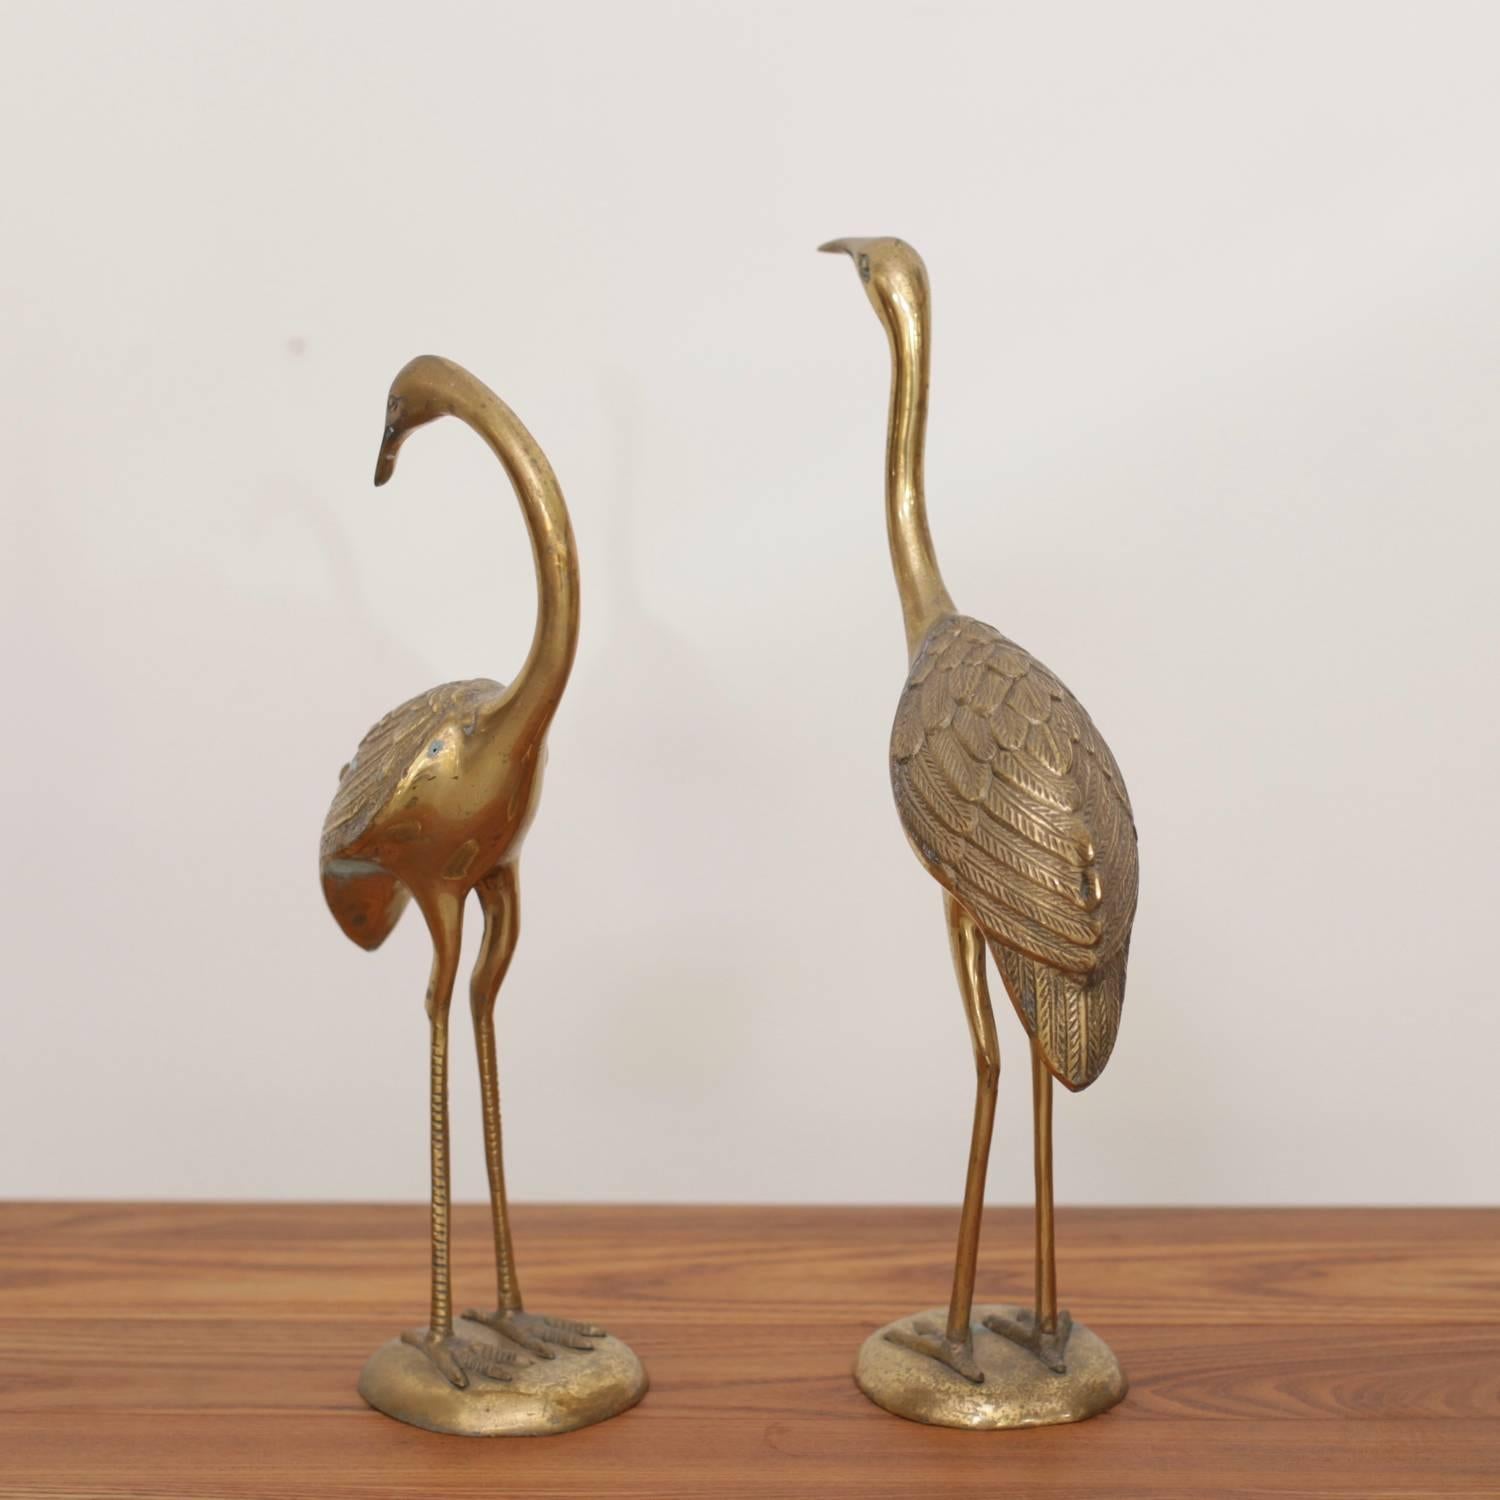 Beautiful pair of flamingos or cranes made of brass. They are in very good condition and they bring the Hollywood Regency glamour in every room.

